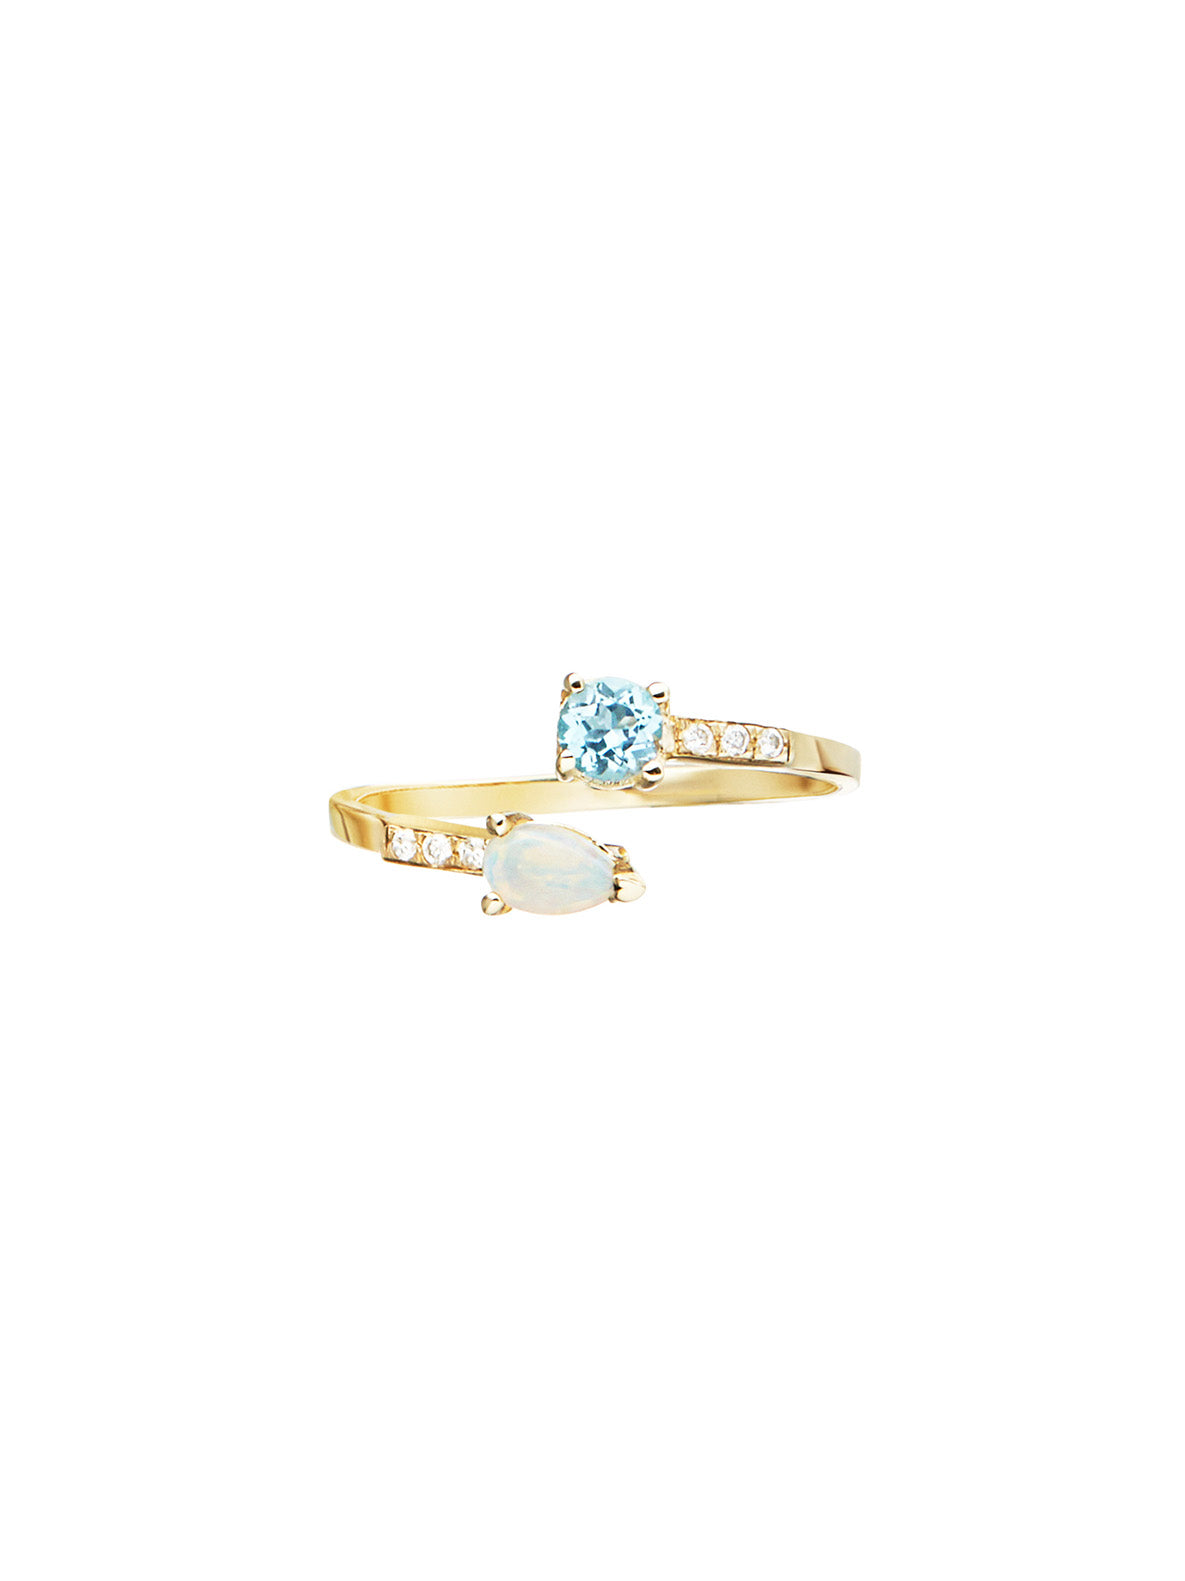 Opal Heiress Ring - Archival Product